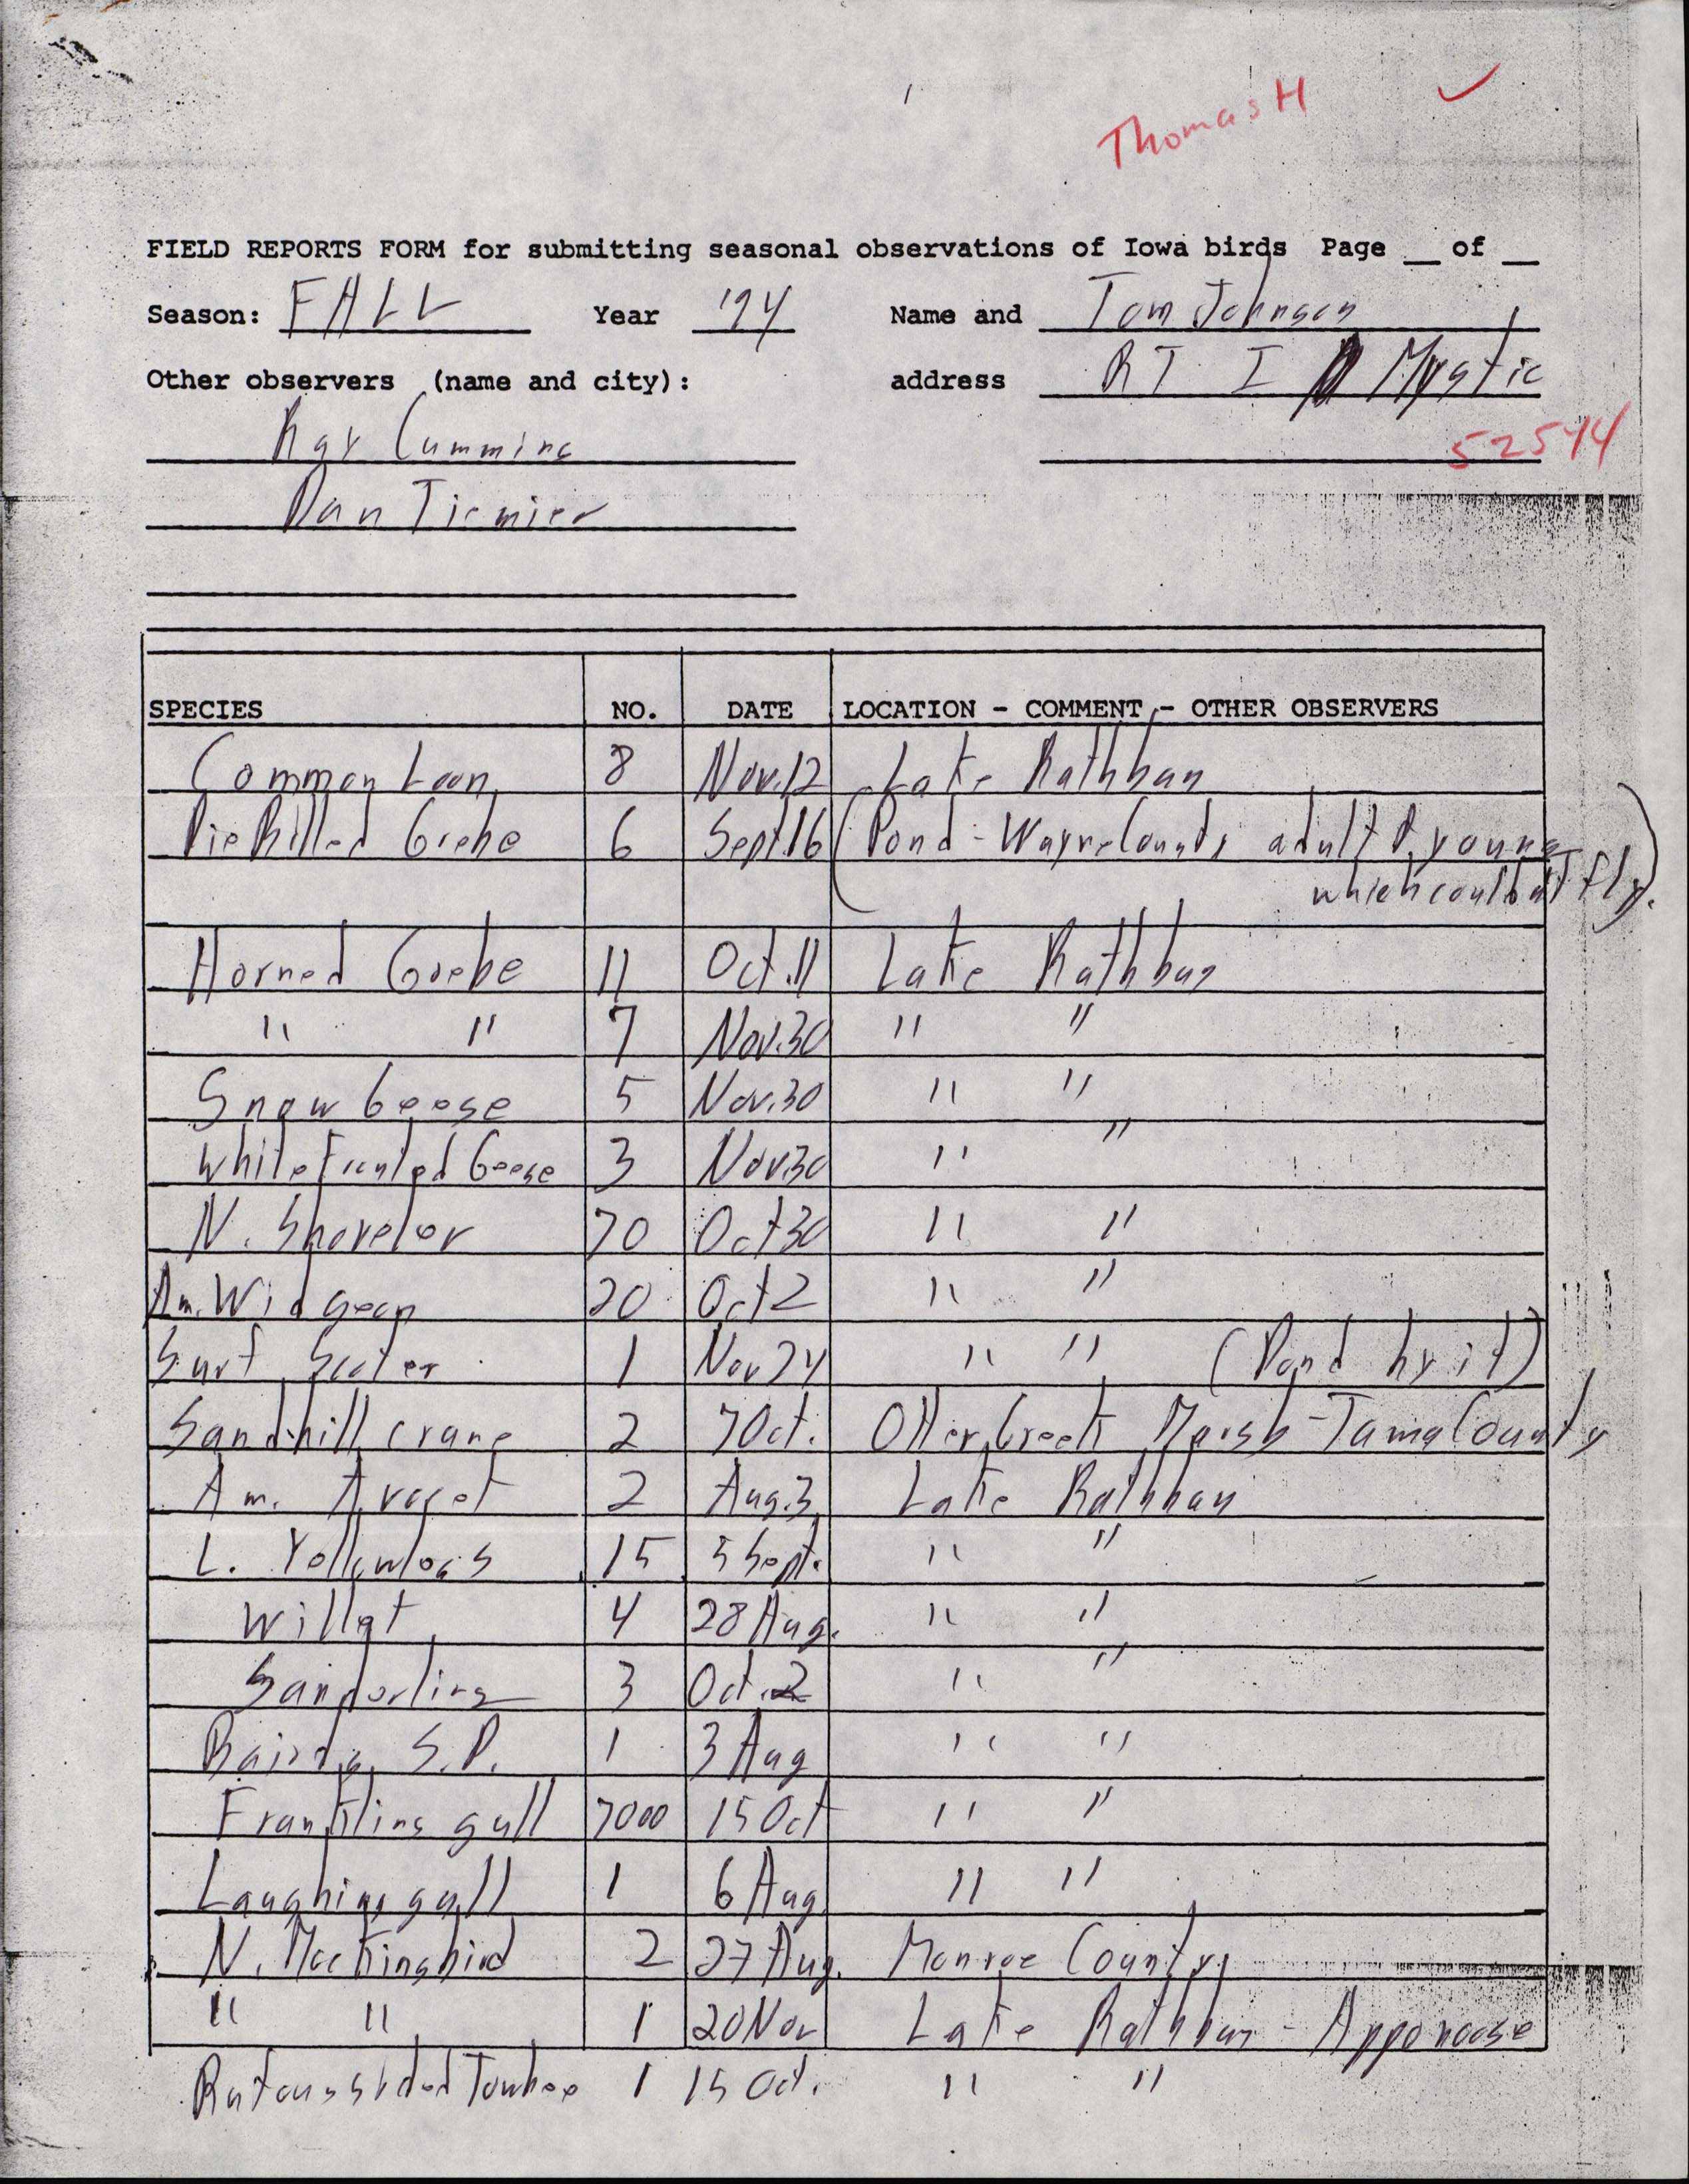 Field reports form for submitting seasonal observations of Iowa birds, Tom Johnson, fall 1994